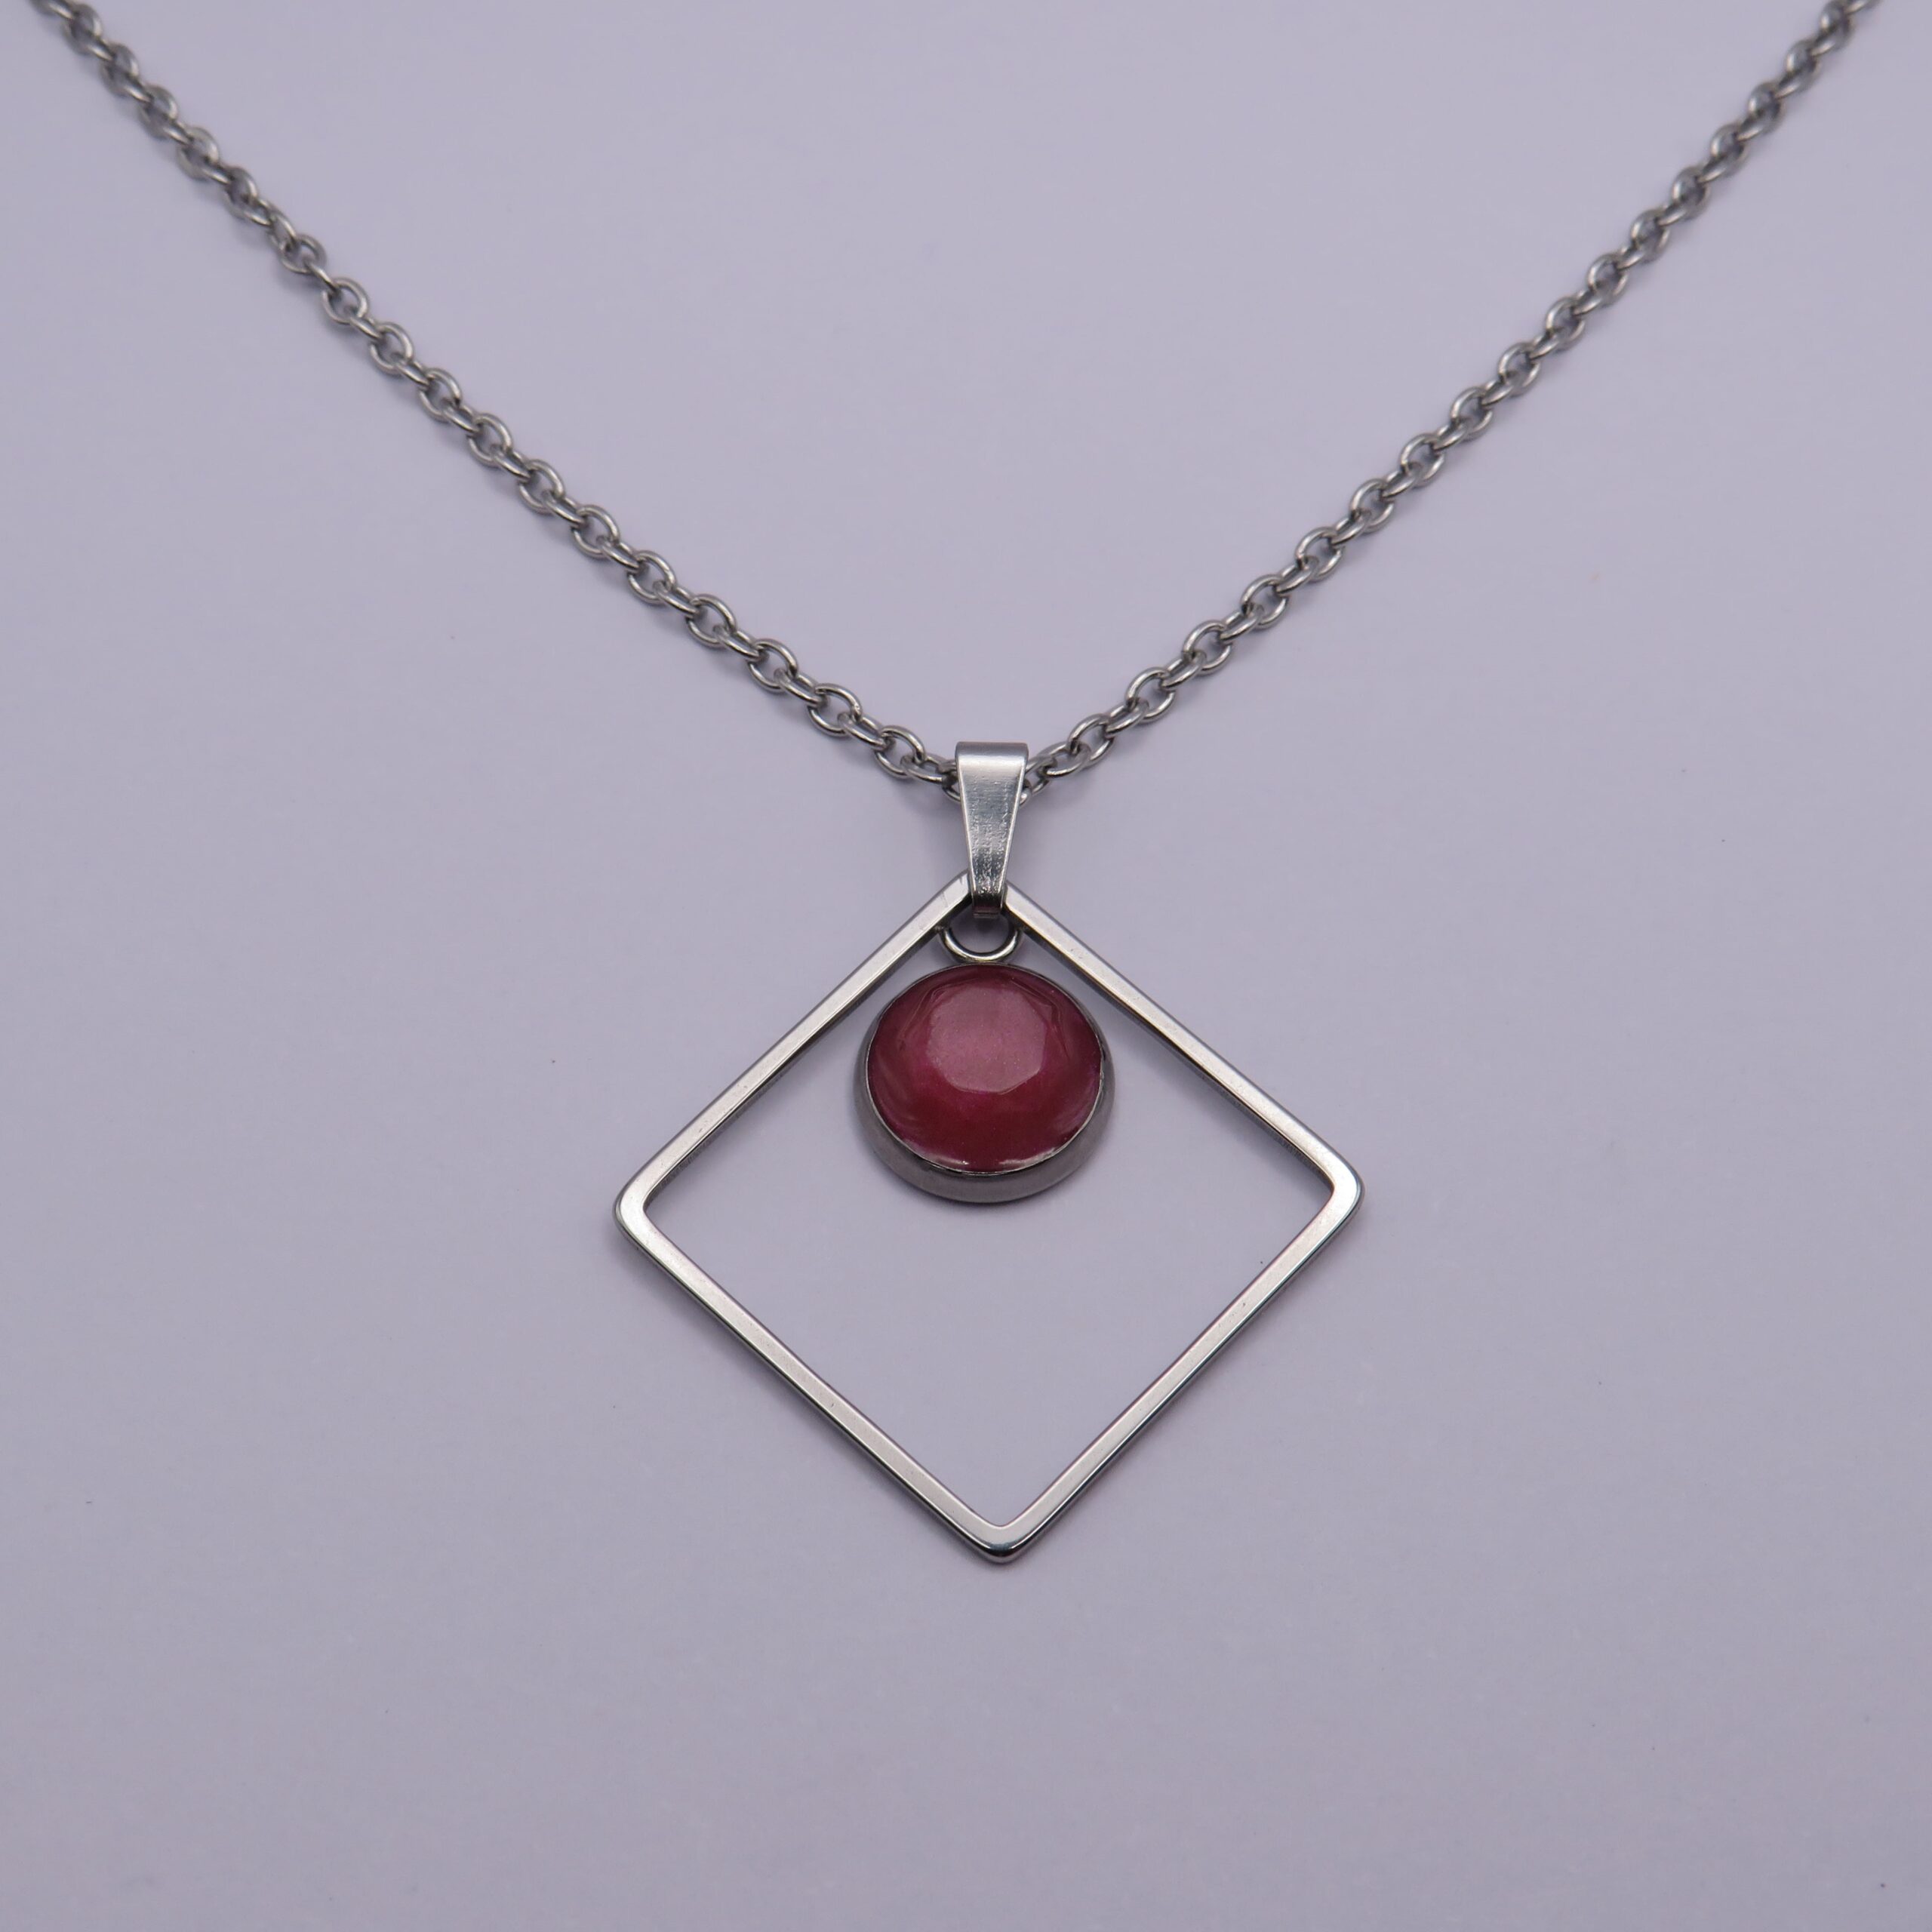 Stainless Steel Pink Cabochon Square Pendant Necklace